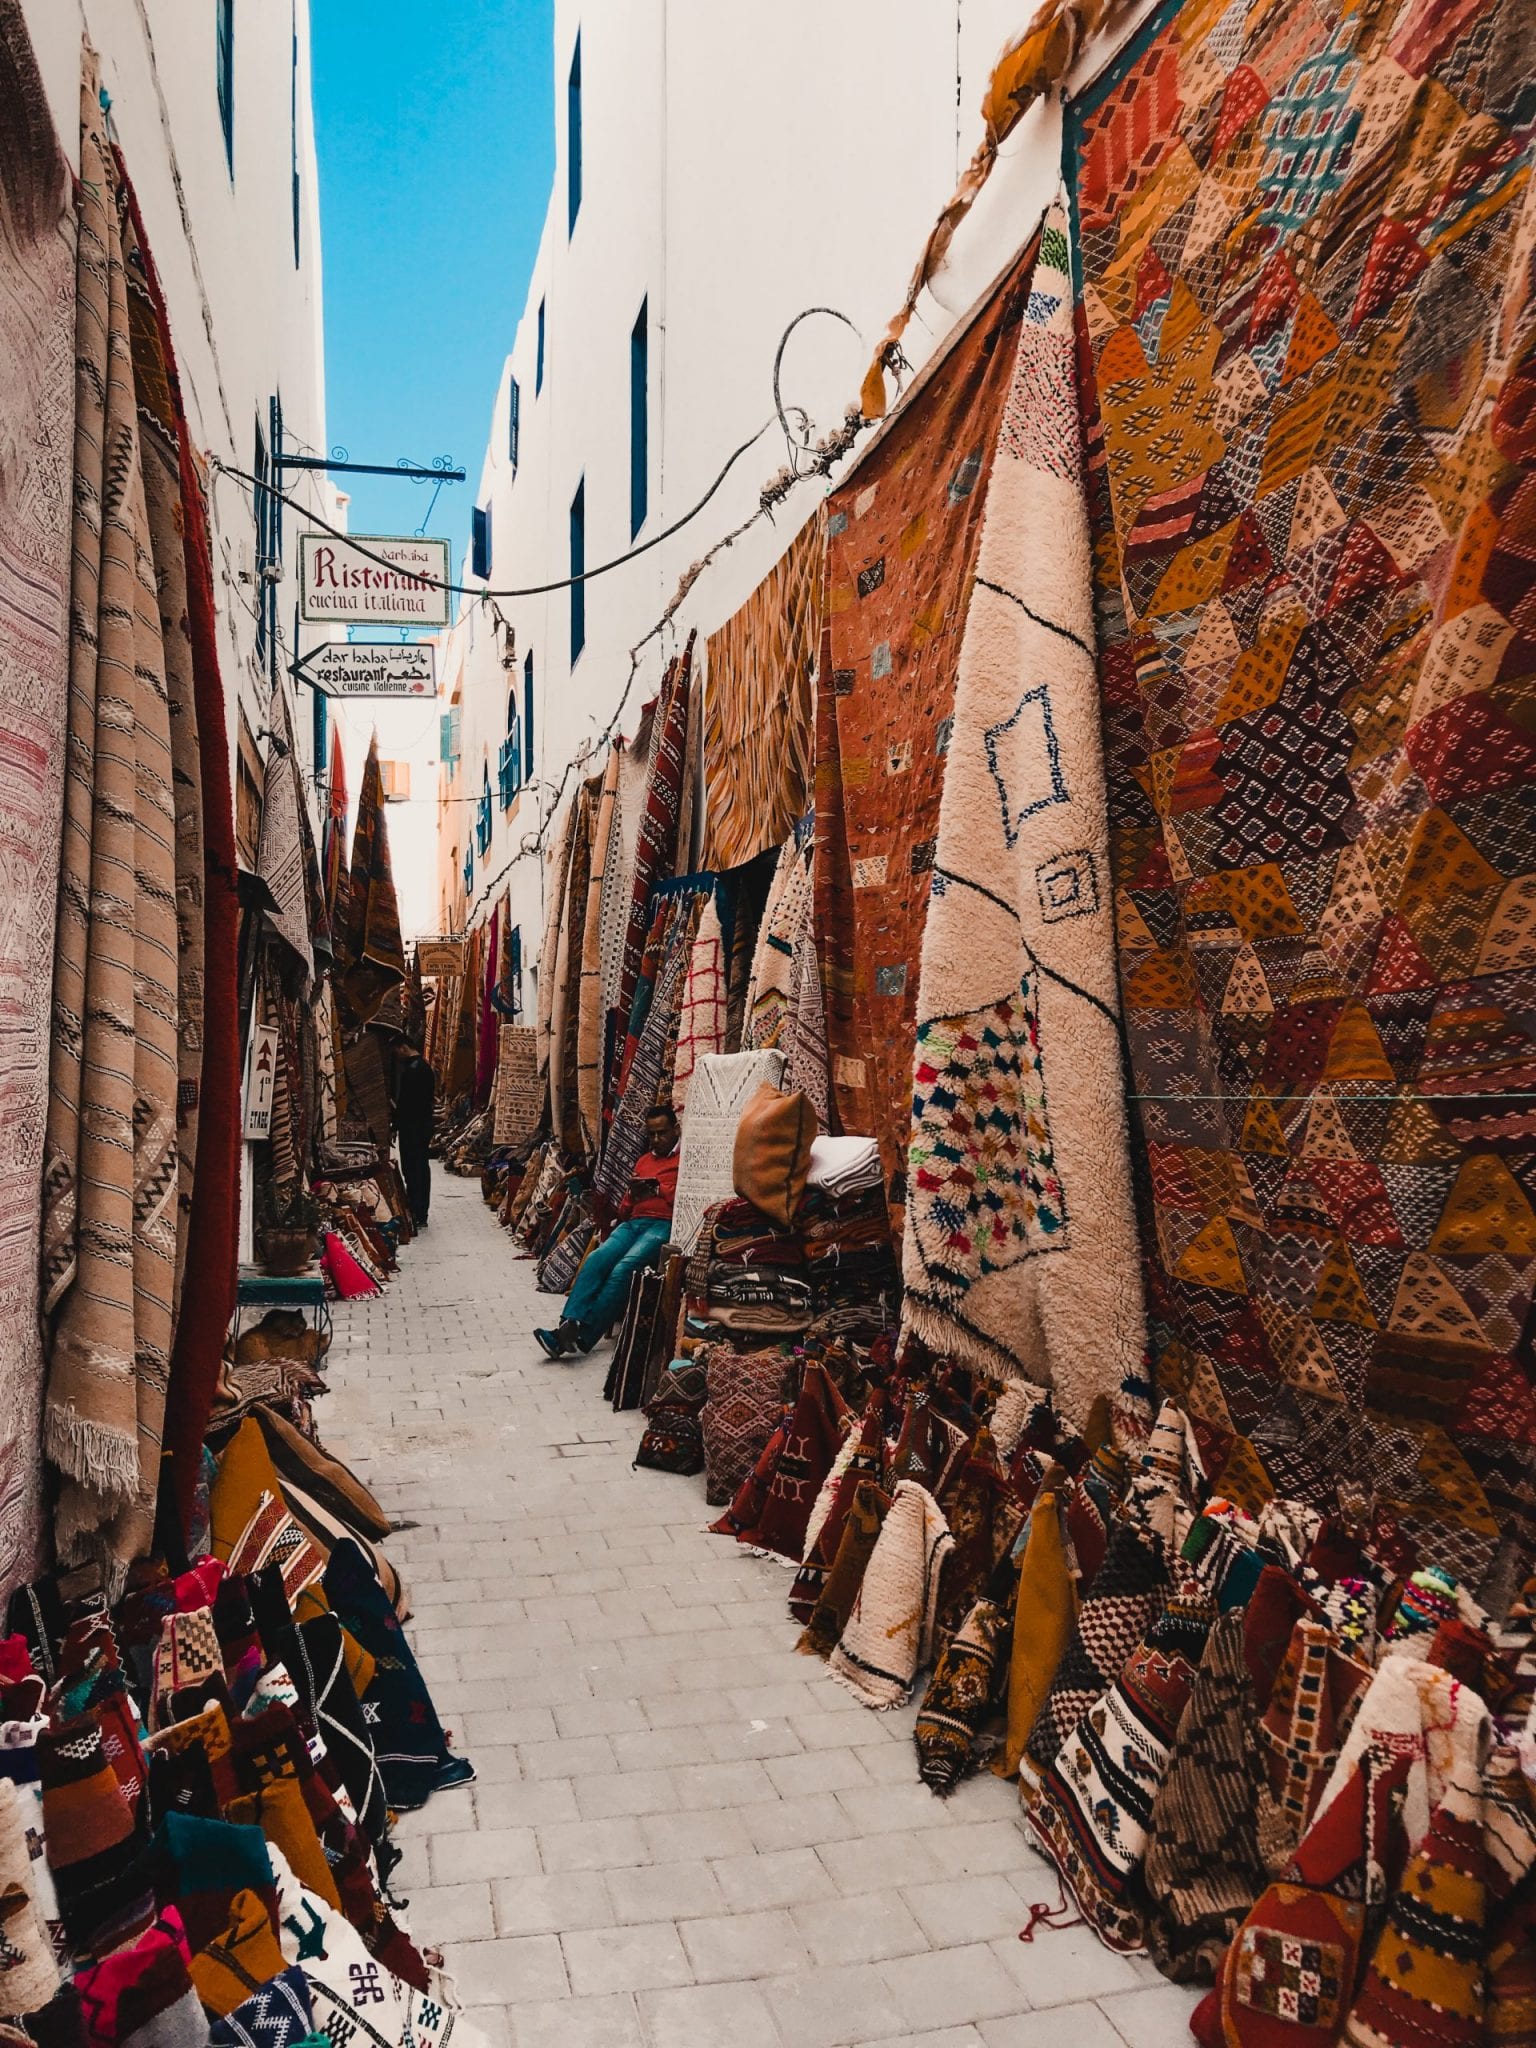 Rugs and textiles in an alleyway, Essaouira Morocco 